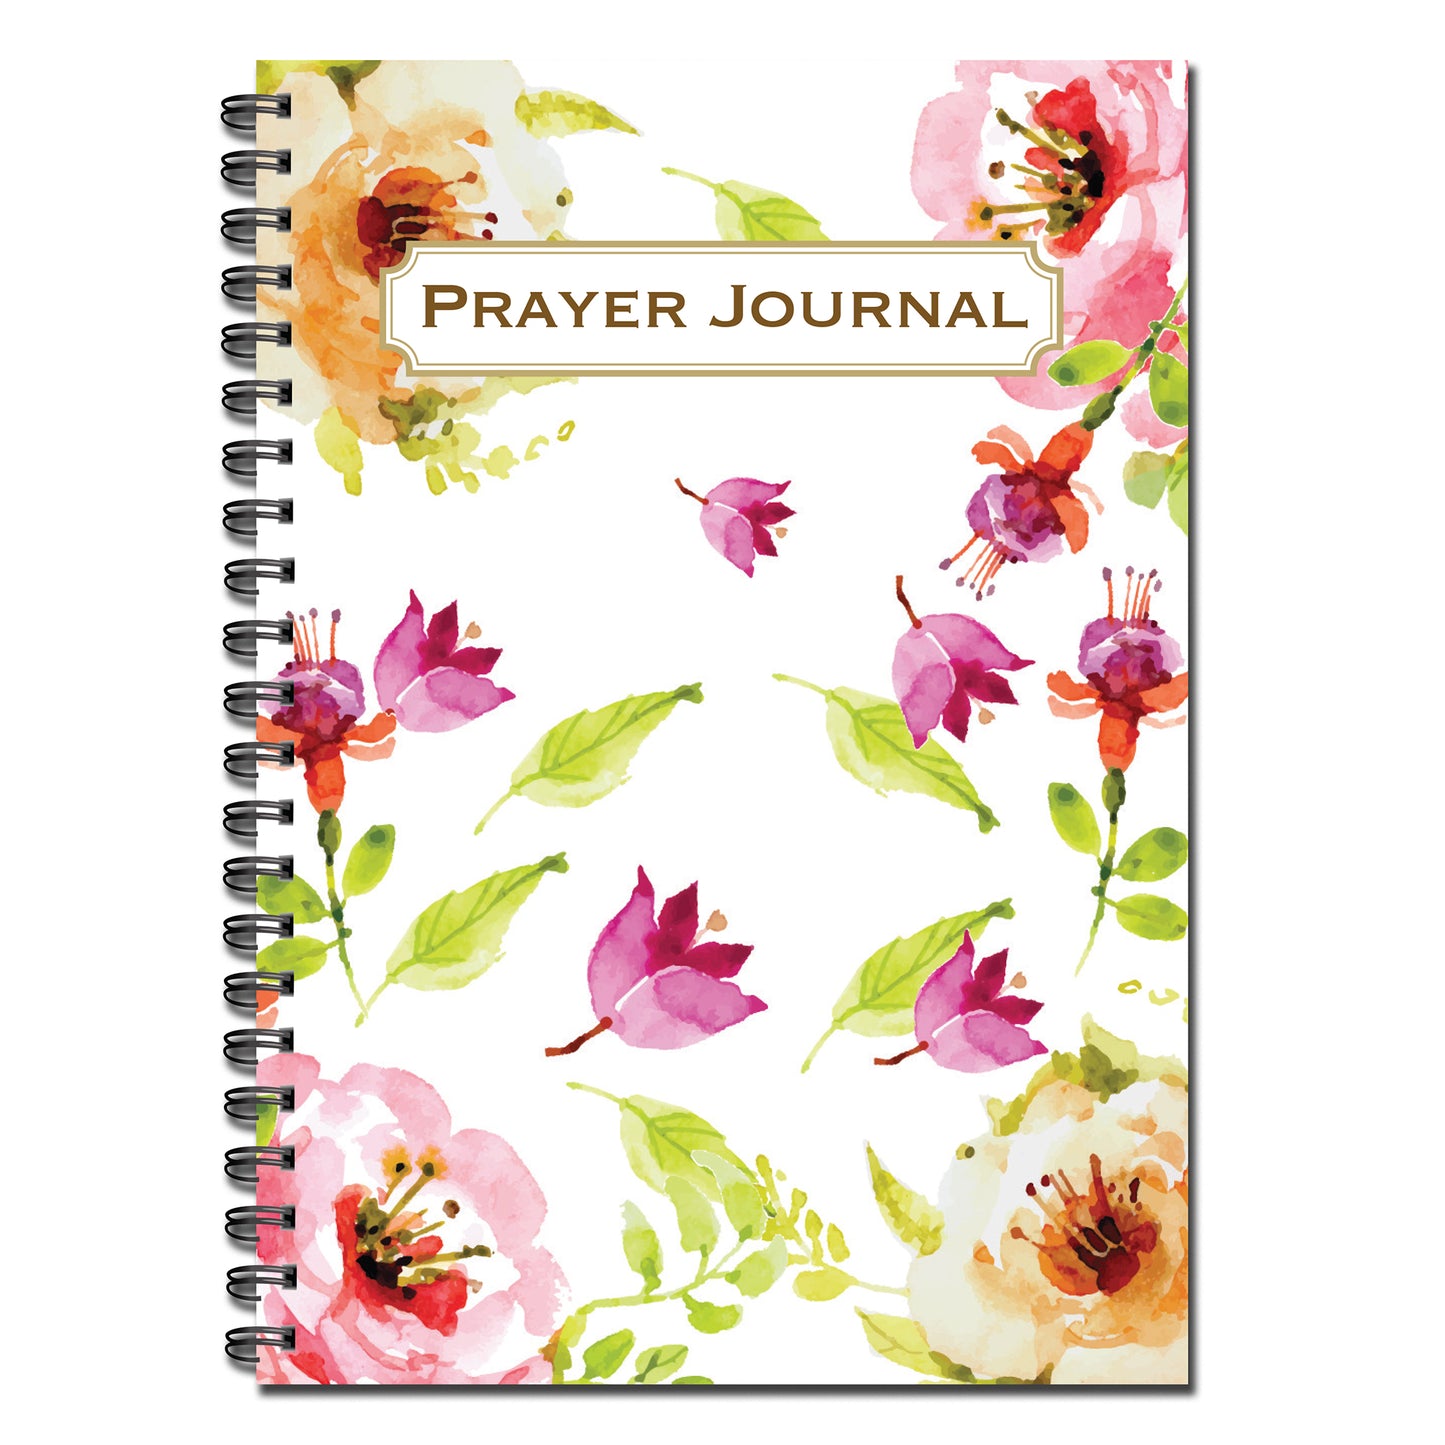 Prayer Journal | Notes | A5 (148mm x 210mm) | 50 double sided pages Wirobound